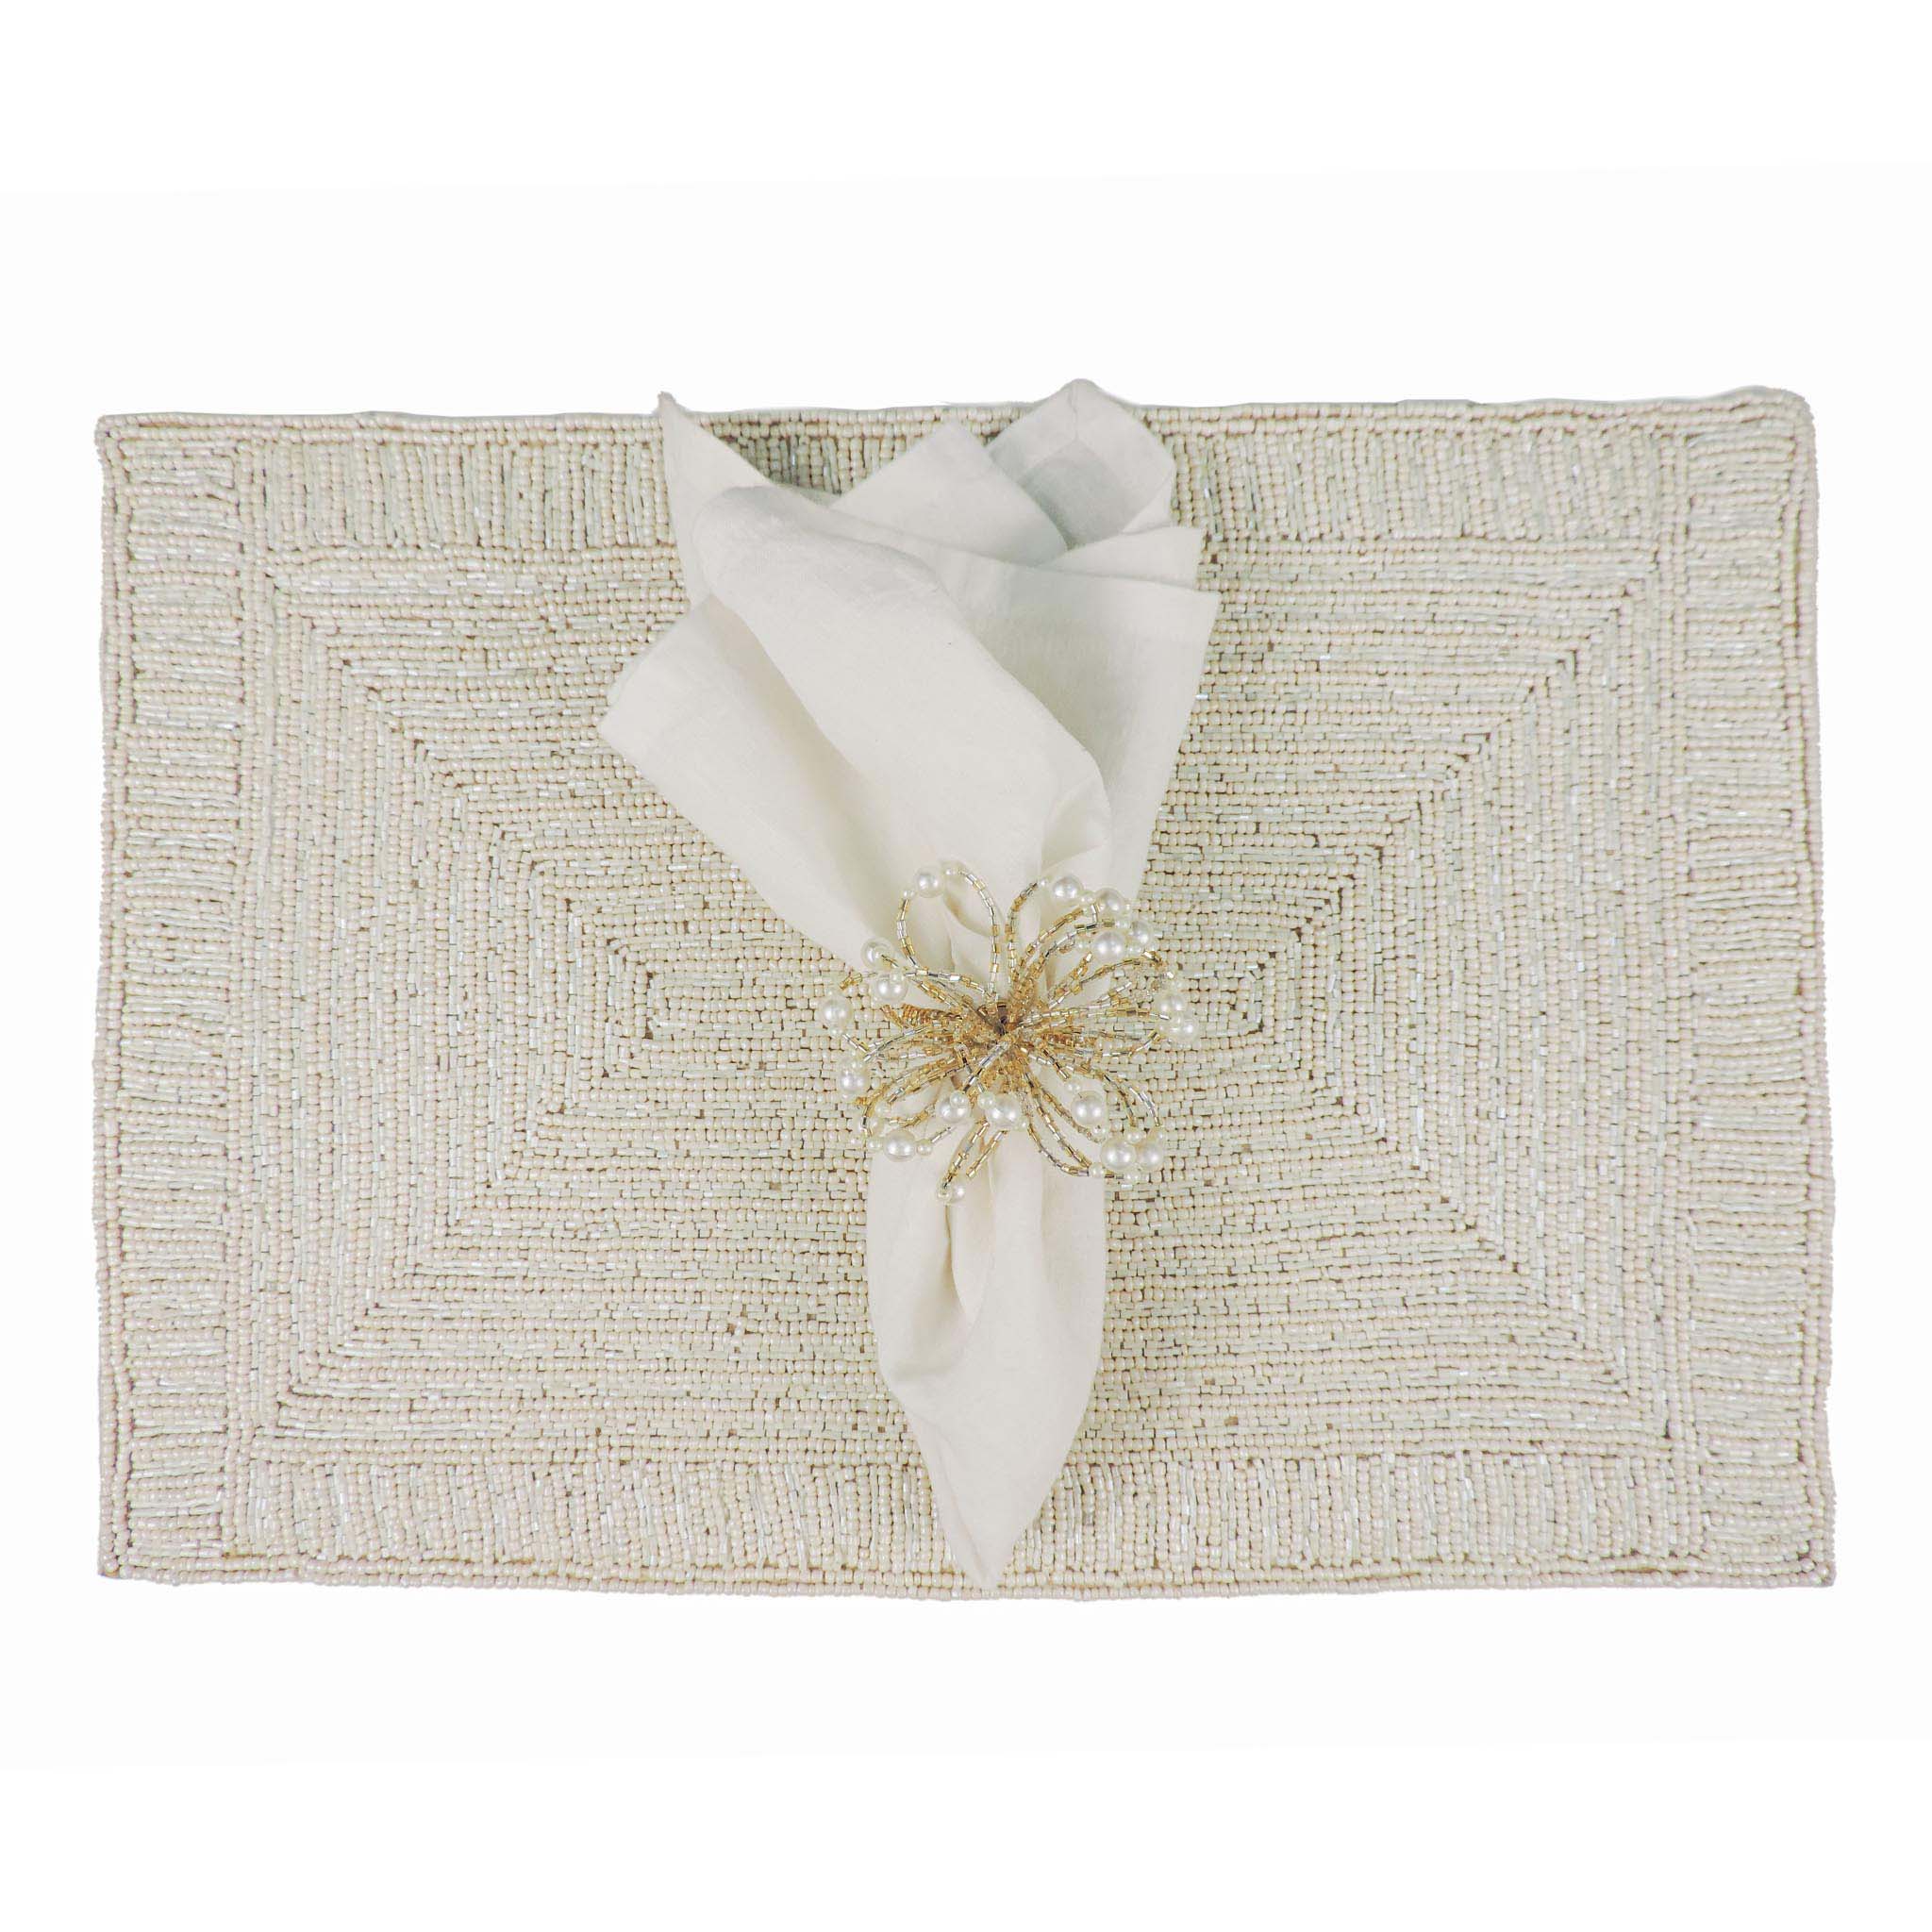 Glass Bead Embroidered Placemat in Off-White, Set of 2